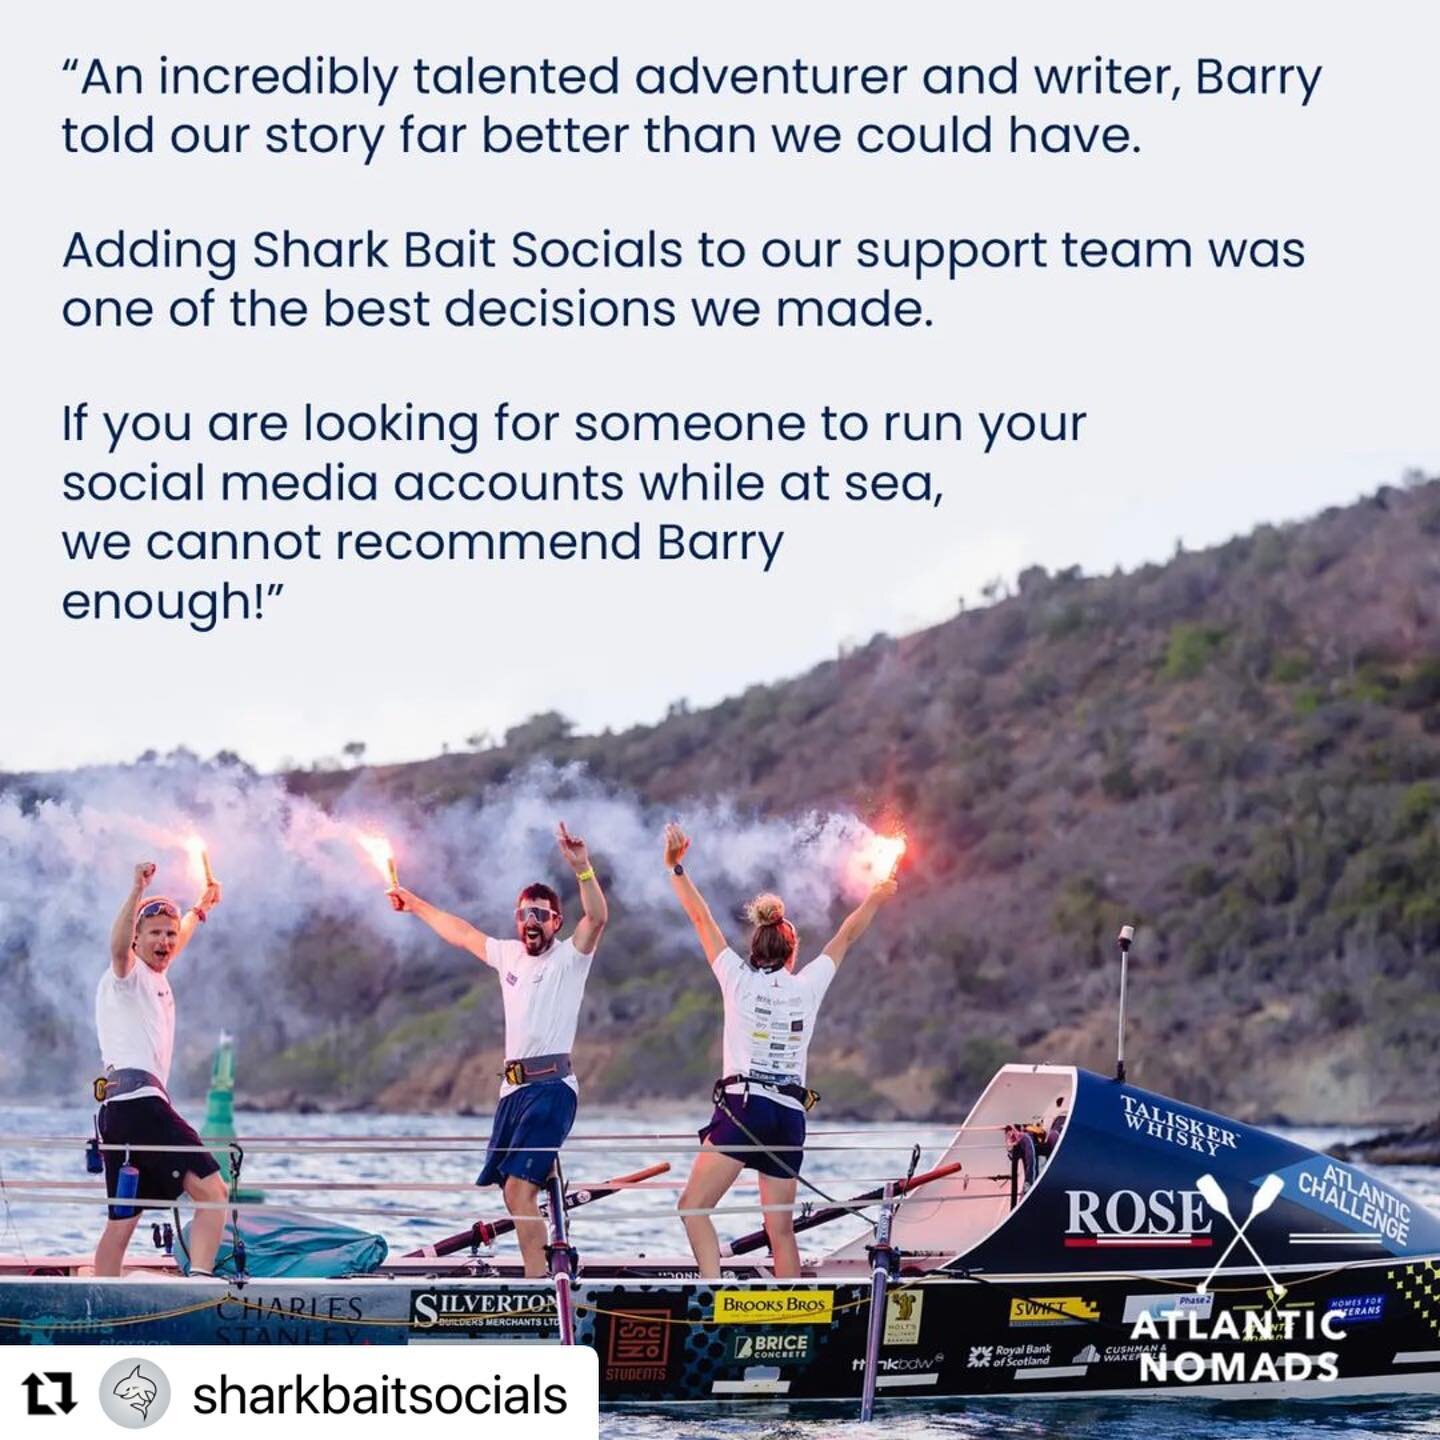 #Repost @sharkbaitsocials 

@atlanticnomads - 2021 winners of the trio class in the @Atlanticcampaigns race, current world record holders for fastest mixed trio, and the far more coveted Shark Bait award for loveliest humans. 😂
&bull;
Taylor, James,